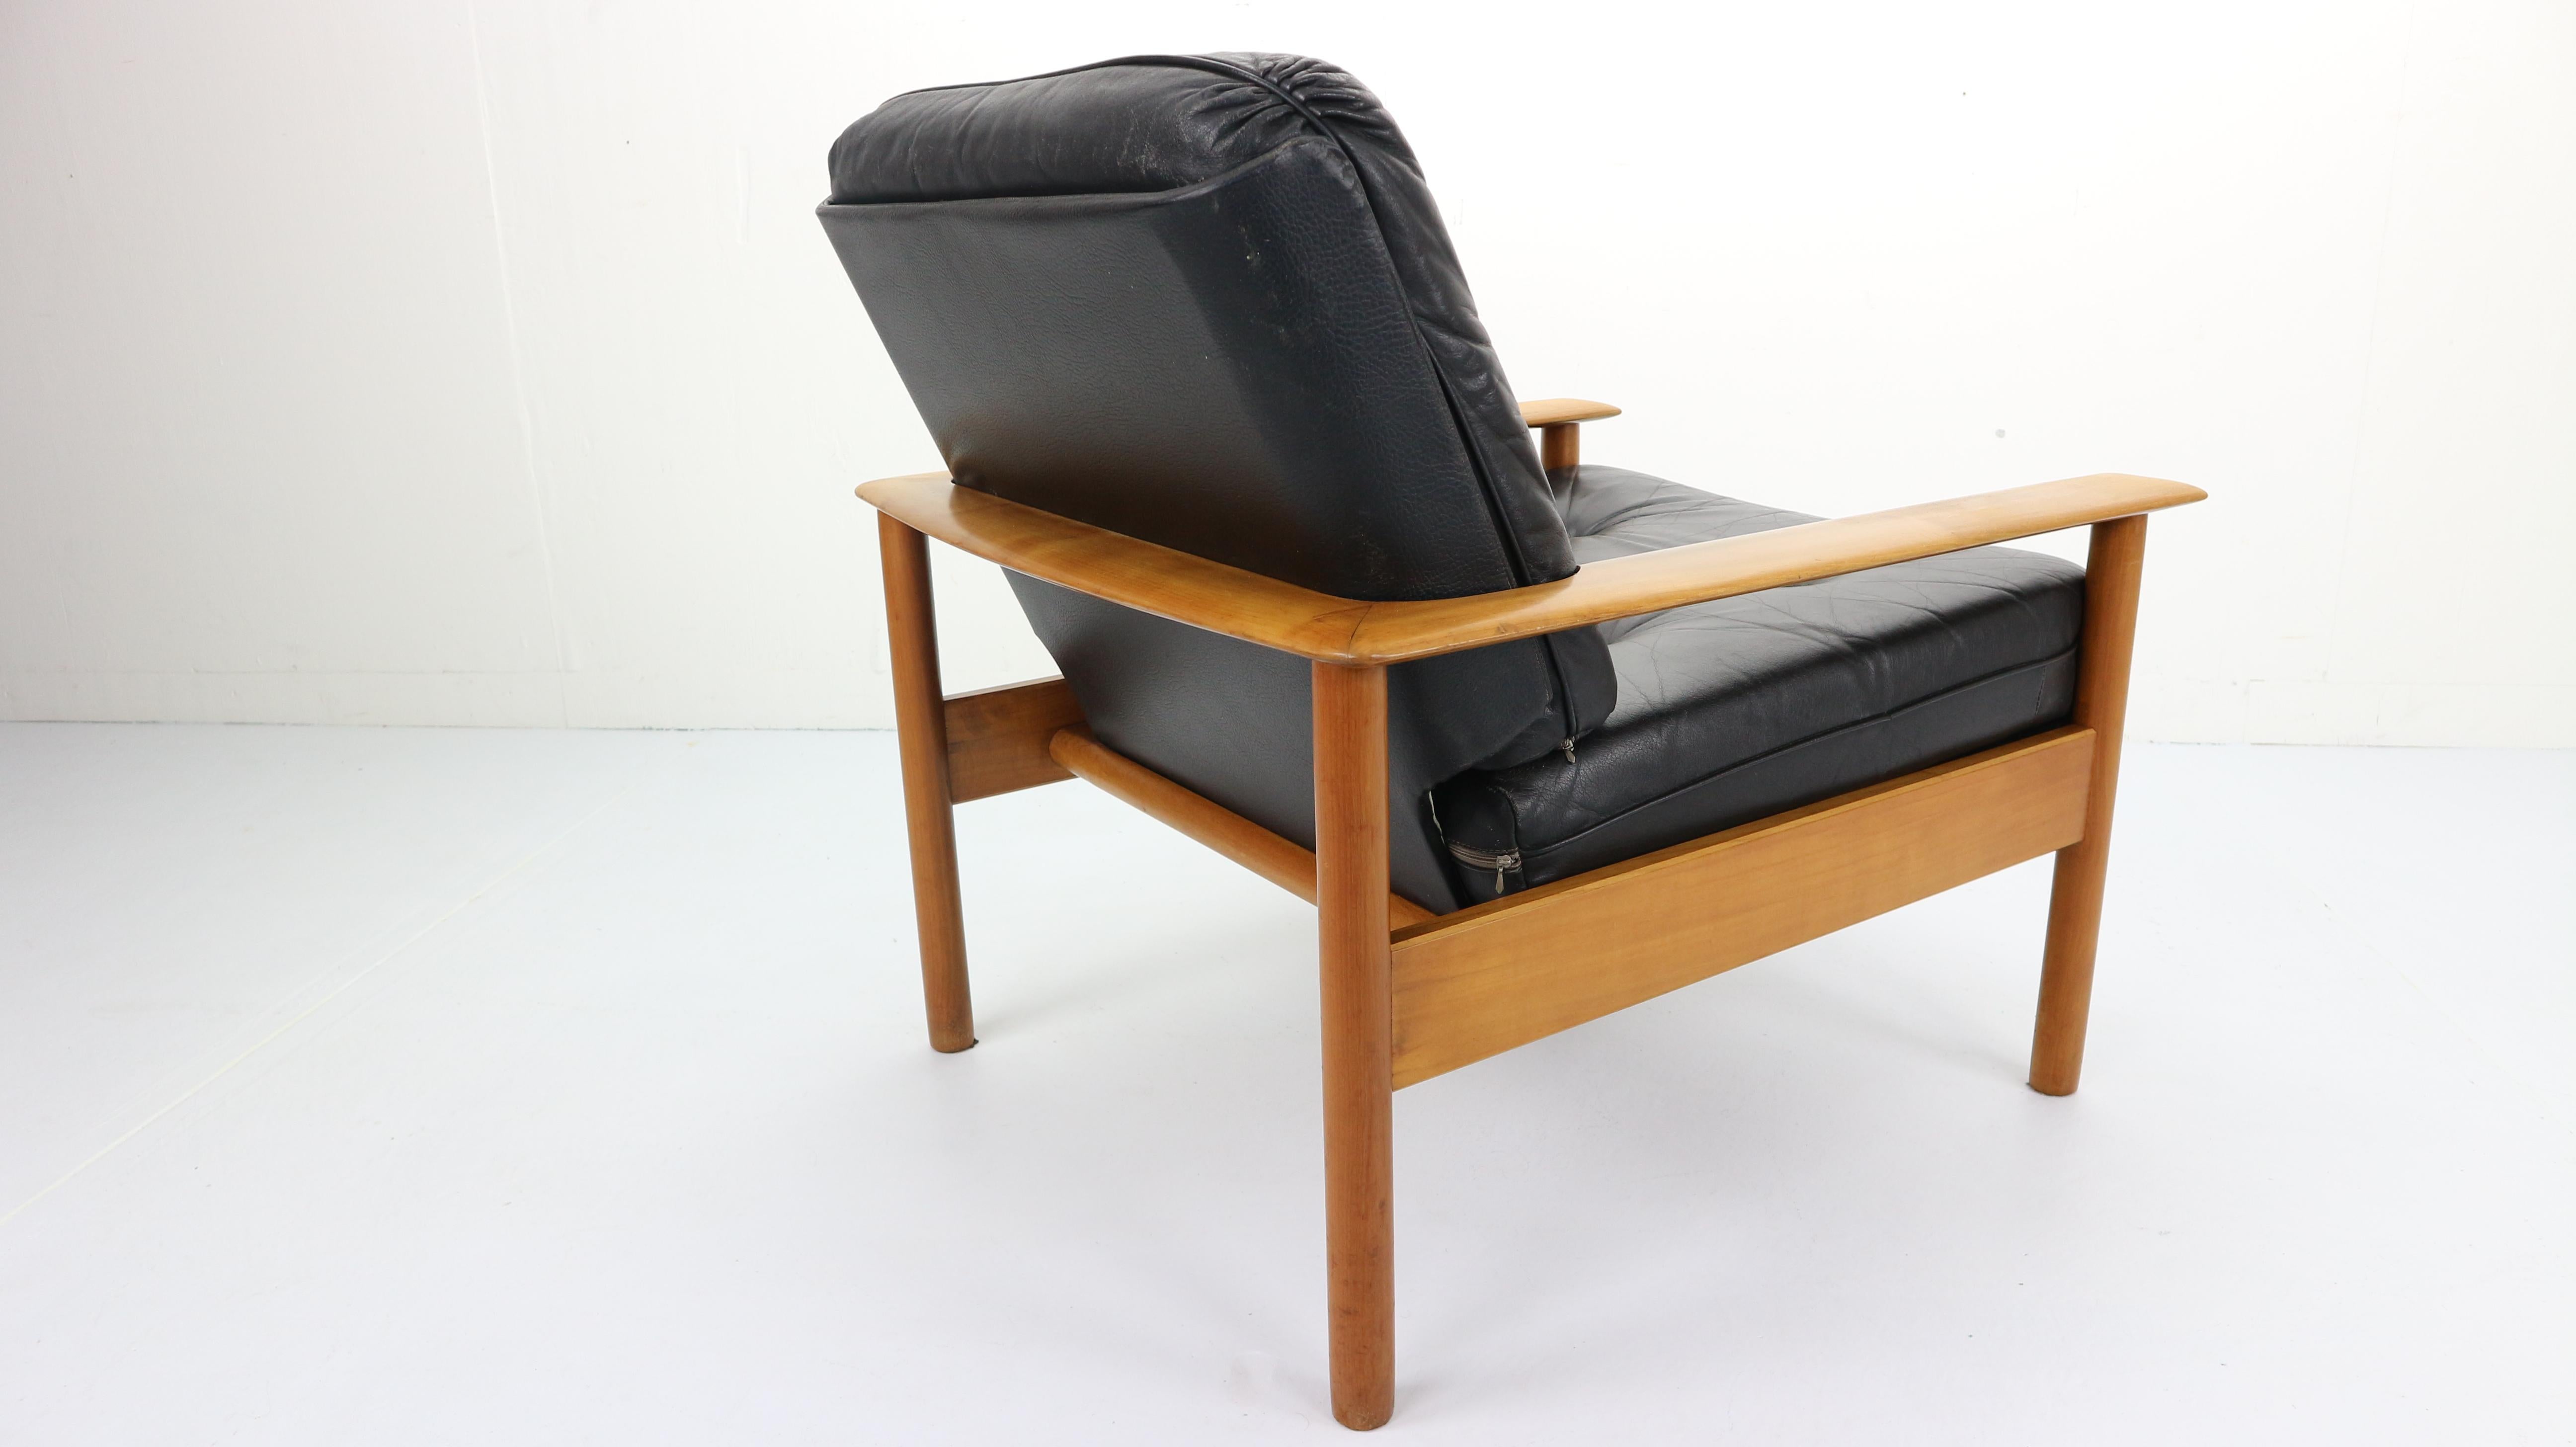 Mid-Century Modern Scandinavian design lounge, chair 1960s.
Curved beech wood details gives an elegant finish touch of framing leather cushions.
Comfortable seating.
In good original condition with minor wear consistent with age and use,